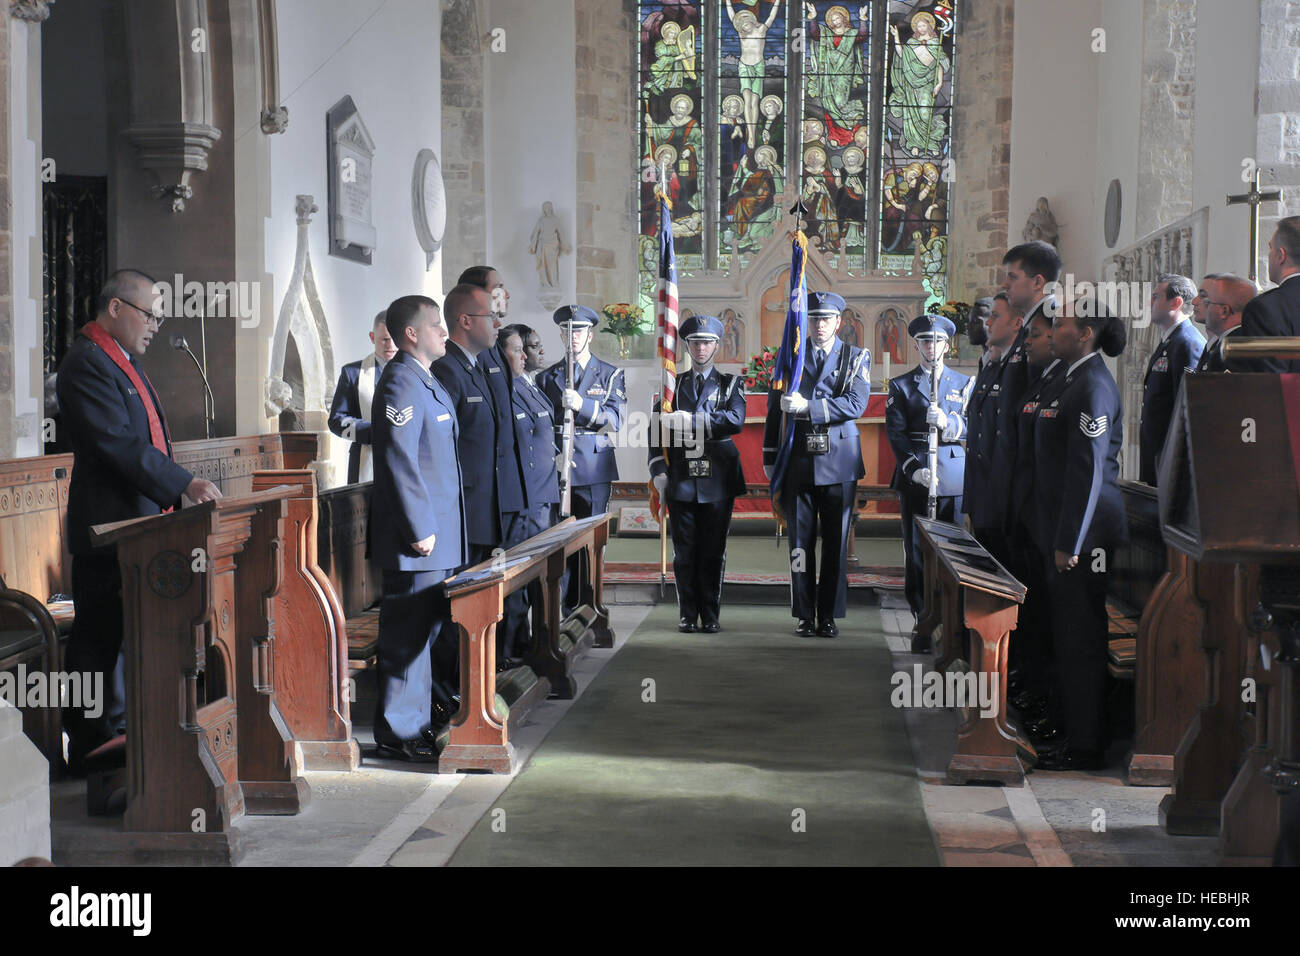 The 422nd Air Base Group Honor Guard presents the colors during the singing of the U.S. national anthem during a memorial service in the Parish Church of St. Mary Magdalene in Helmdon Nov. 2. The ceremony honored the 327th Bombardment Squadron, VIII Bomber Command, Airmen killed Nov. 30, 1943, when they left RAF Poddington on a bombing mission to Germany, and their plane crashed at Astwell Castle Farms. (U.S. Air Force photo by Staff Sgt. Brian Stives) Stock Photo